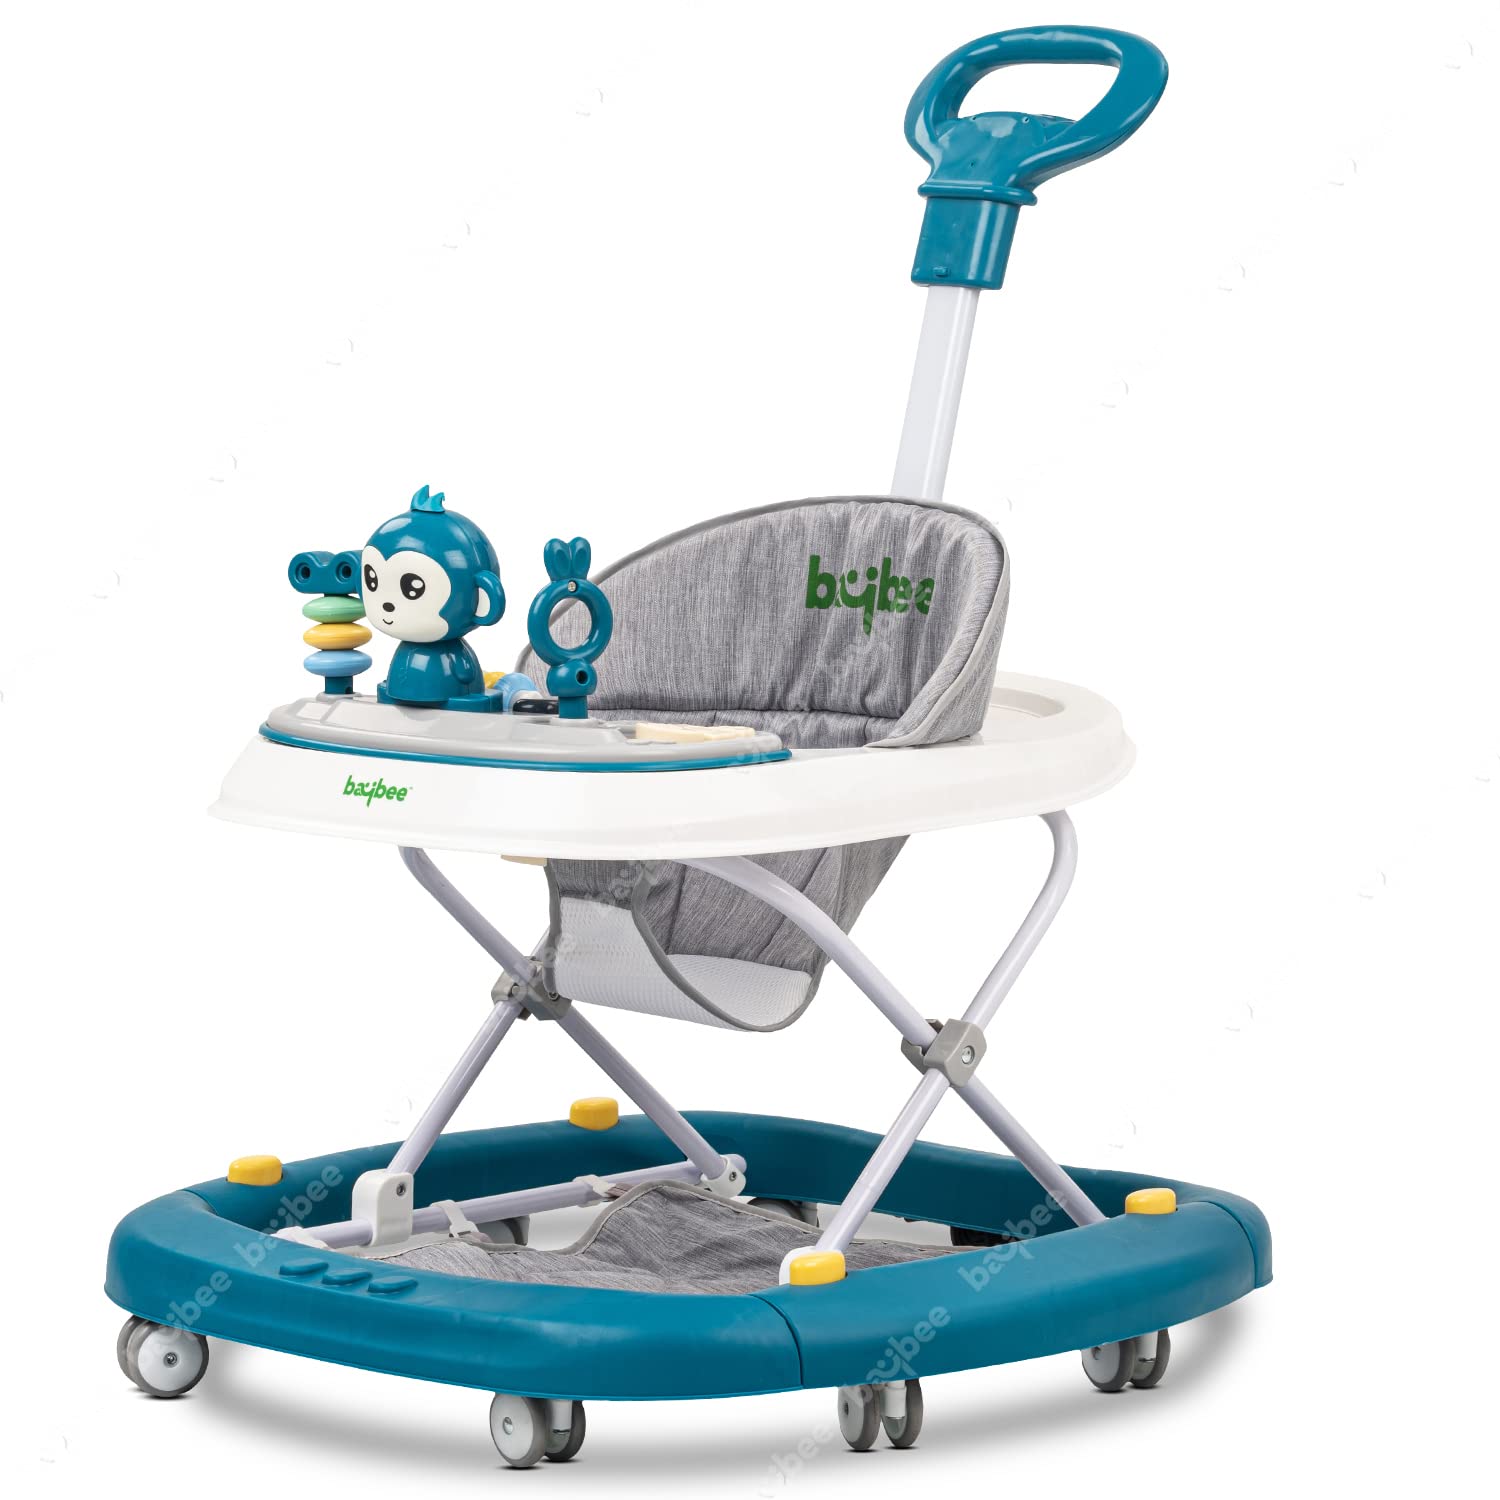 Baybee Baby Walker for Kids, Round Kids Walker with Rocker, Parental Handle, 4 Seat Height Adjustable | Activity Walker for Baby with Musical Toy Bar | Walker Baby 6-18 Months Boy Girl (Gray)